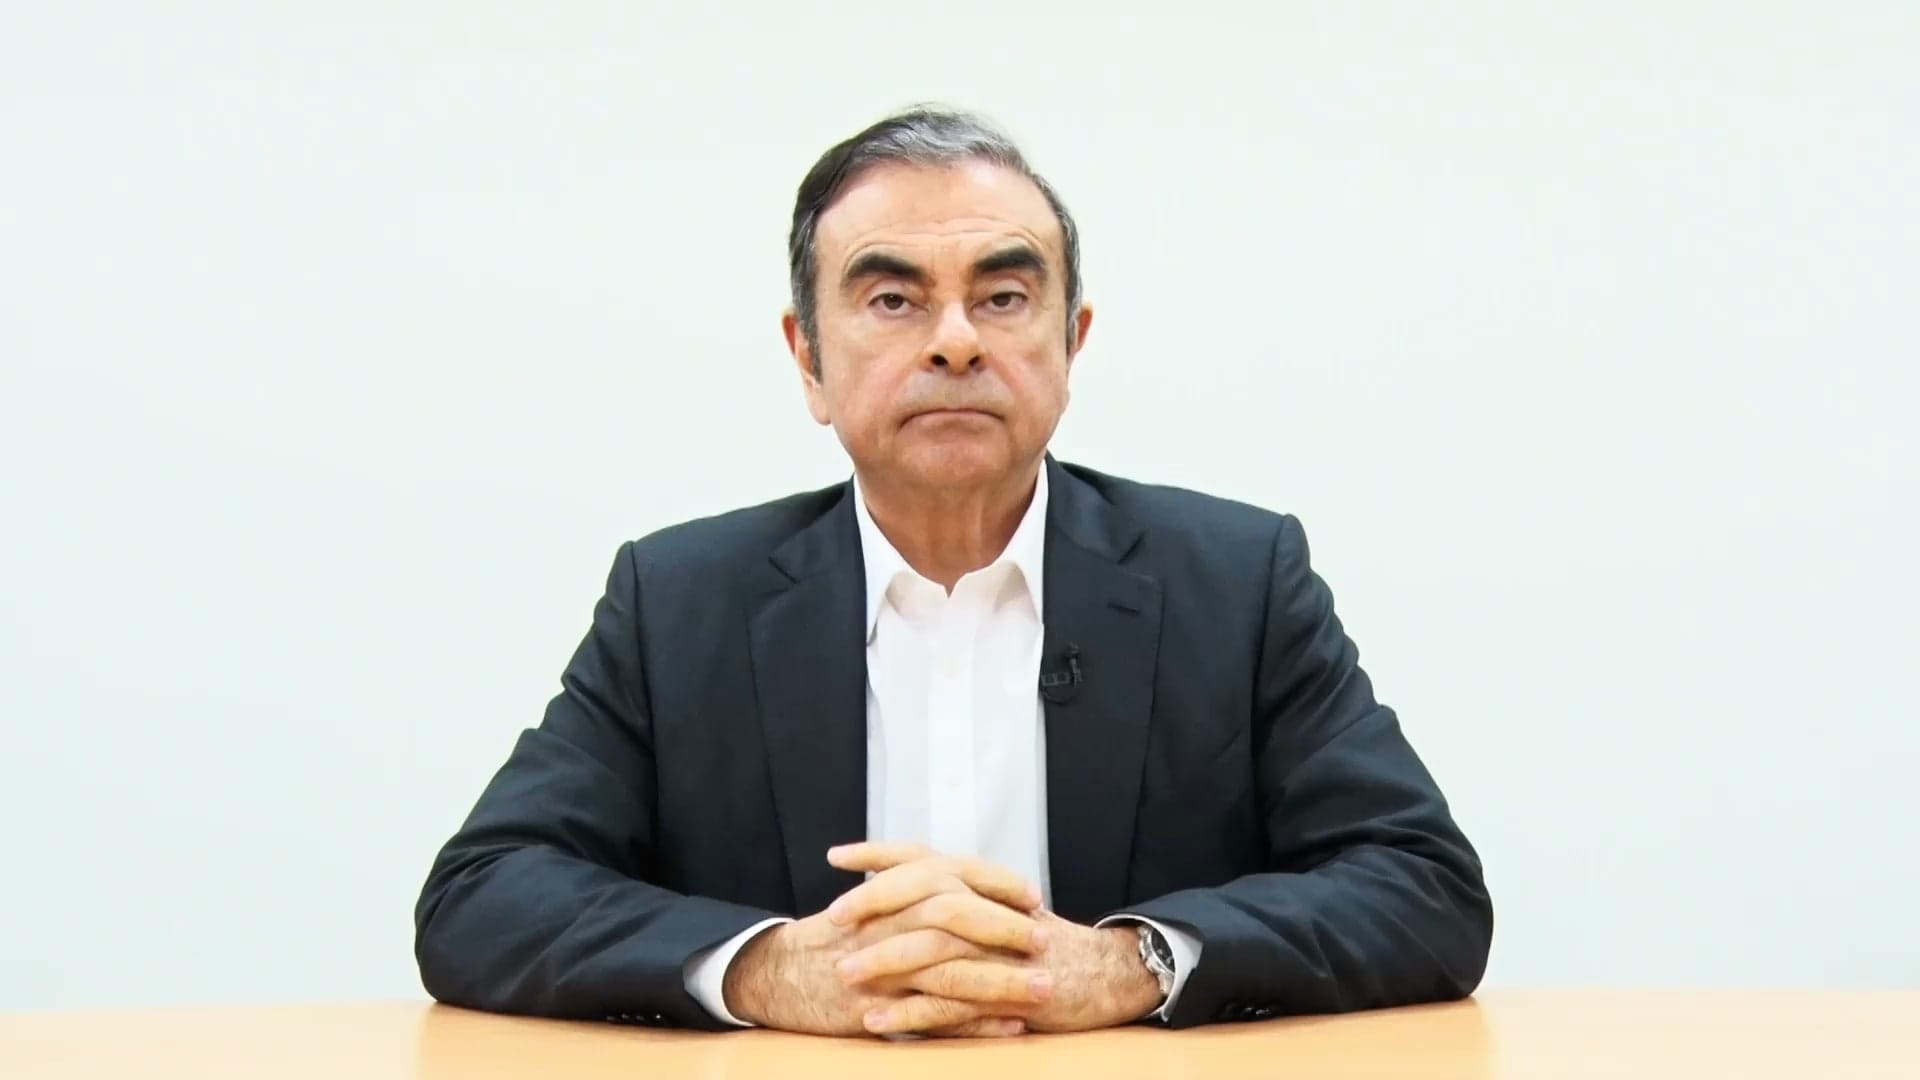 Former Nissan Boss Carlos Ghosn Releases Conspiracy Video, Calls Out ‘Backstabbing’ Executives